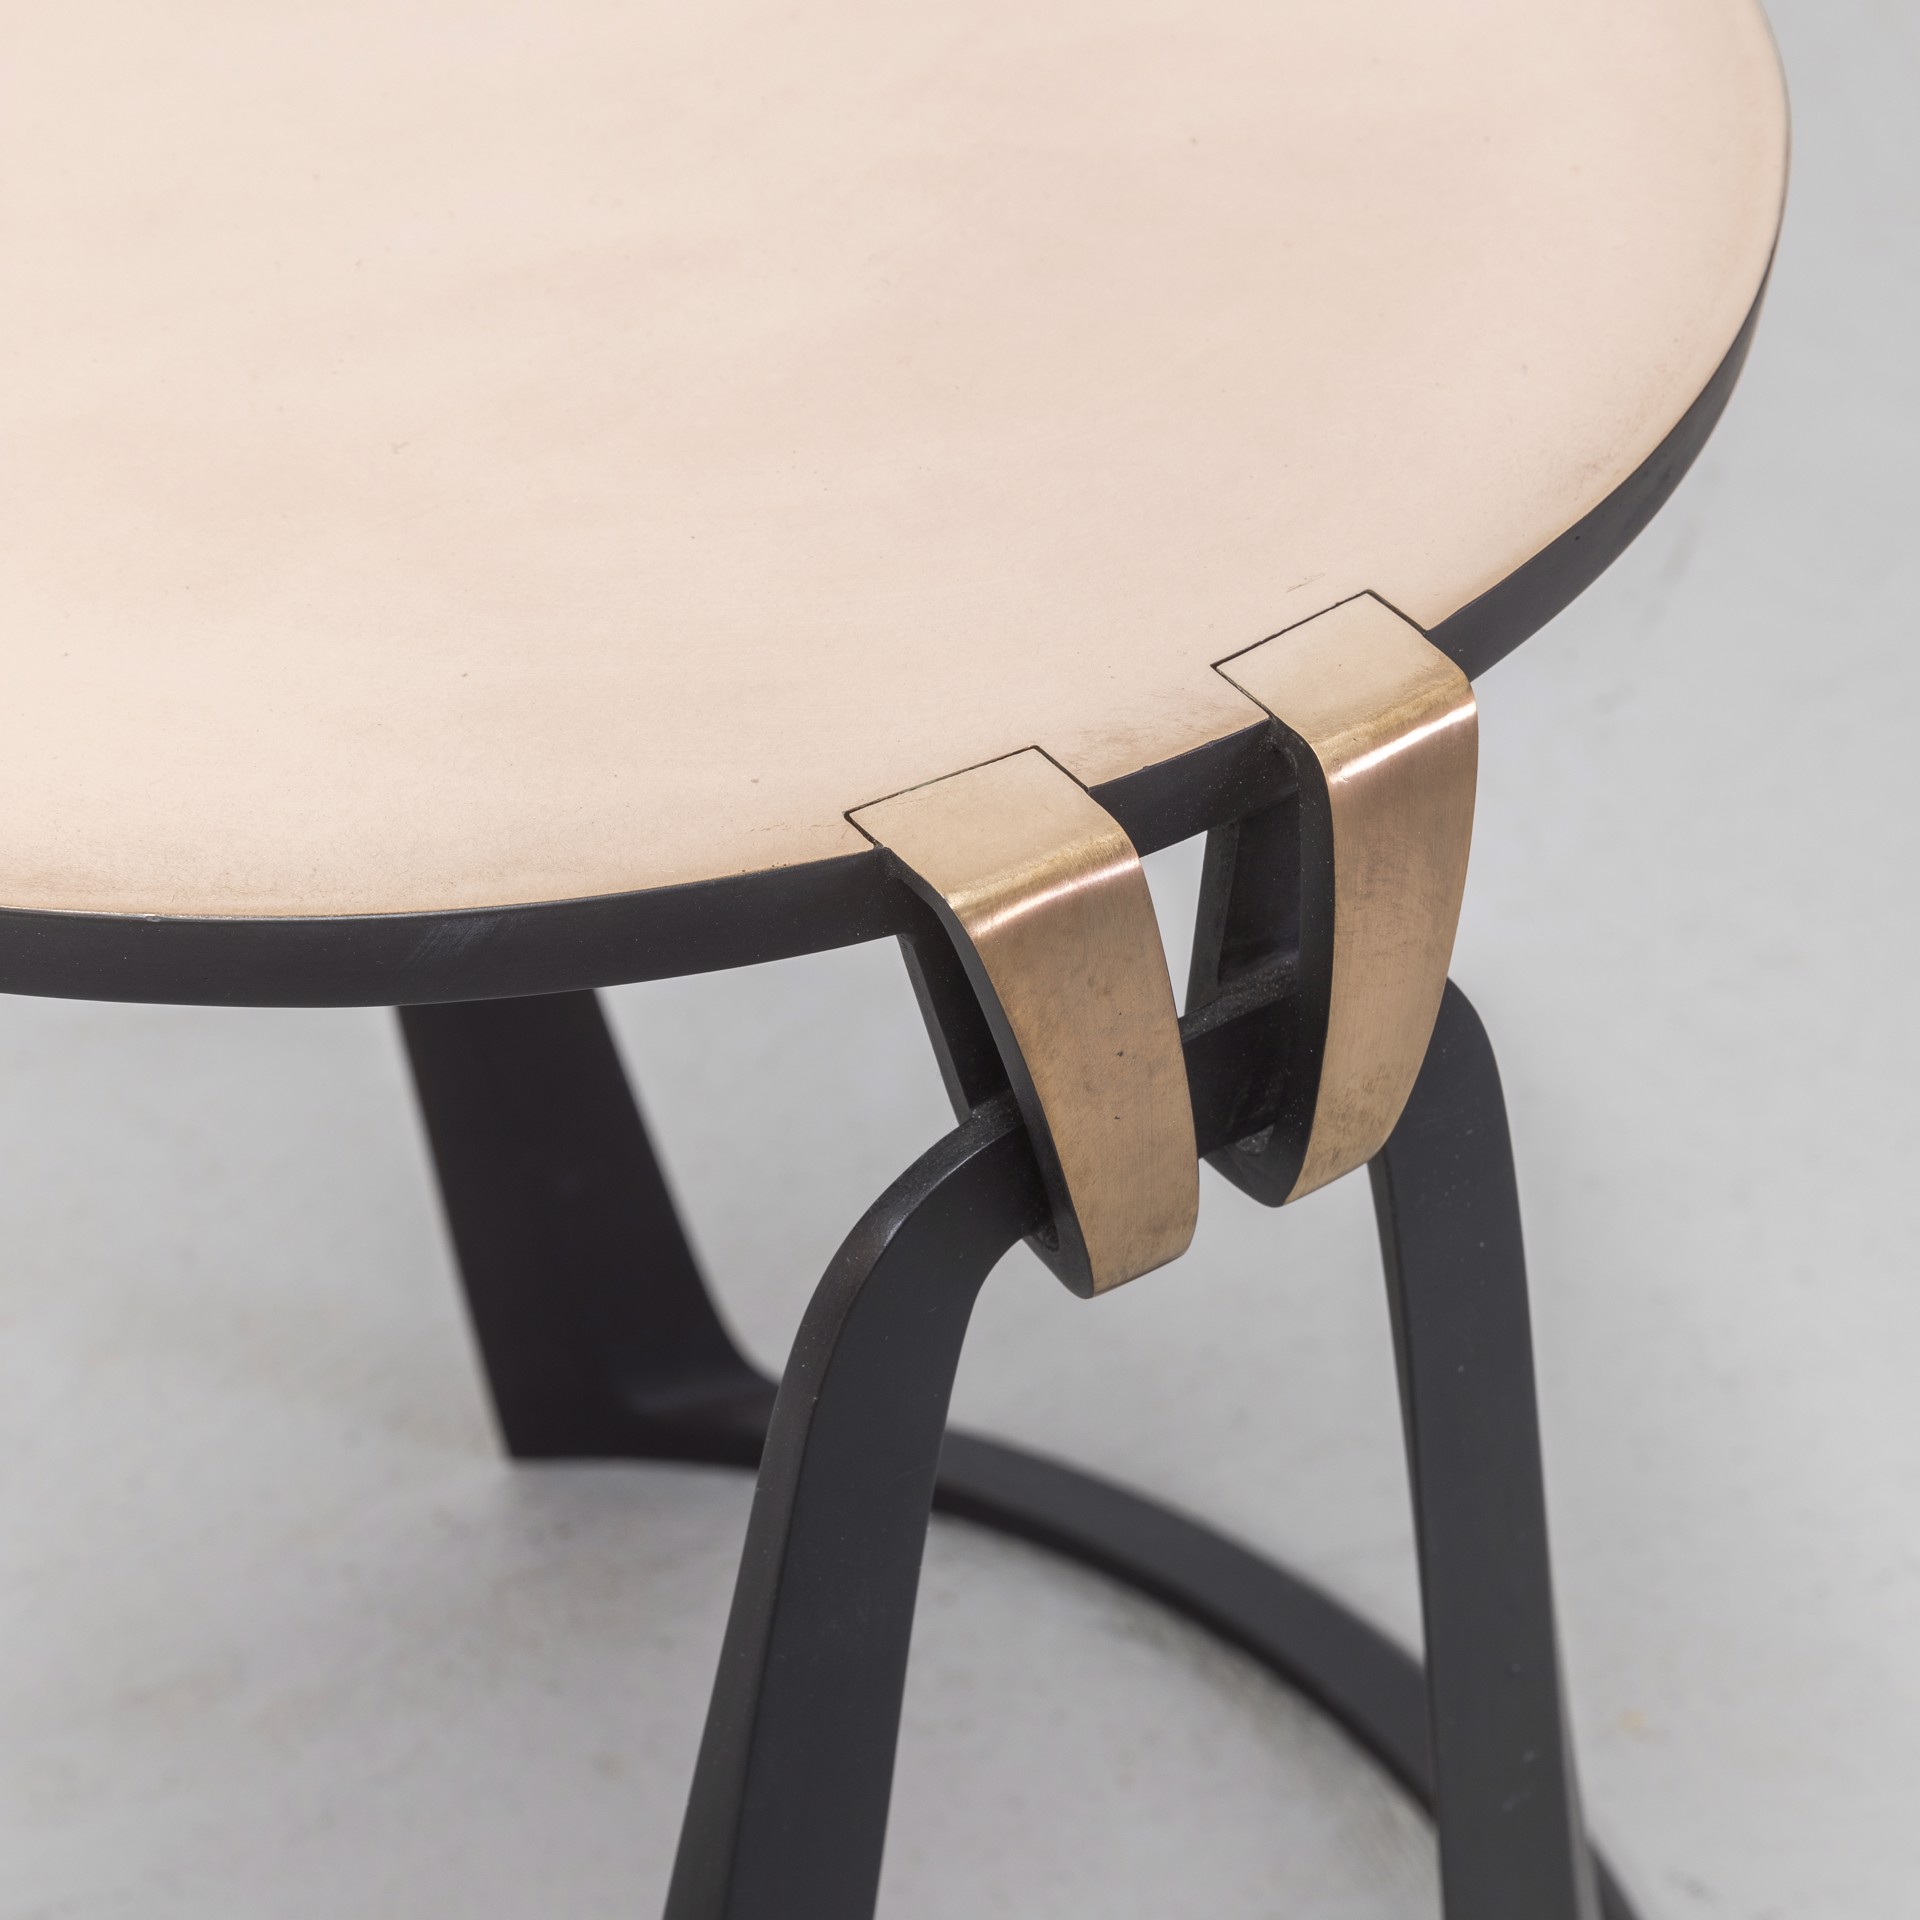 Side table "Link" by Anasthasia Millot